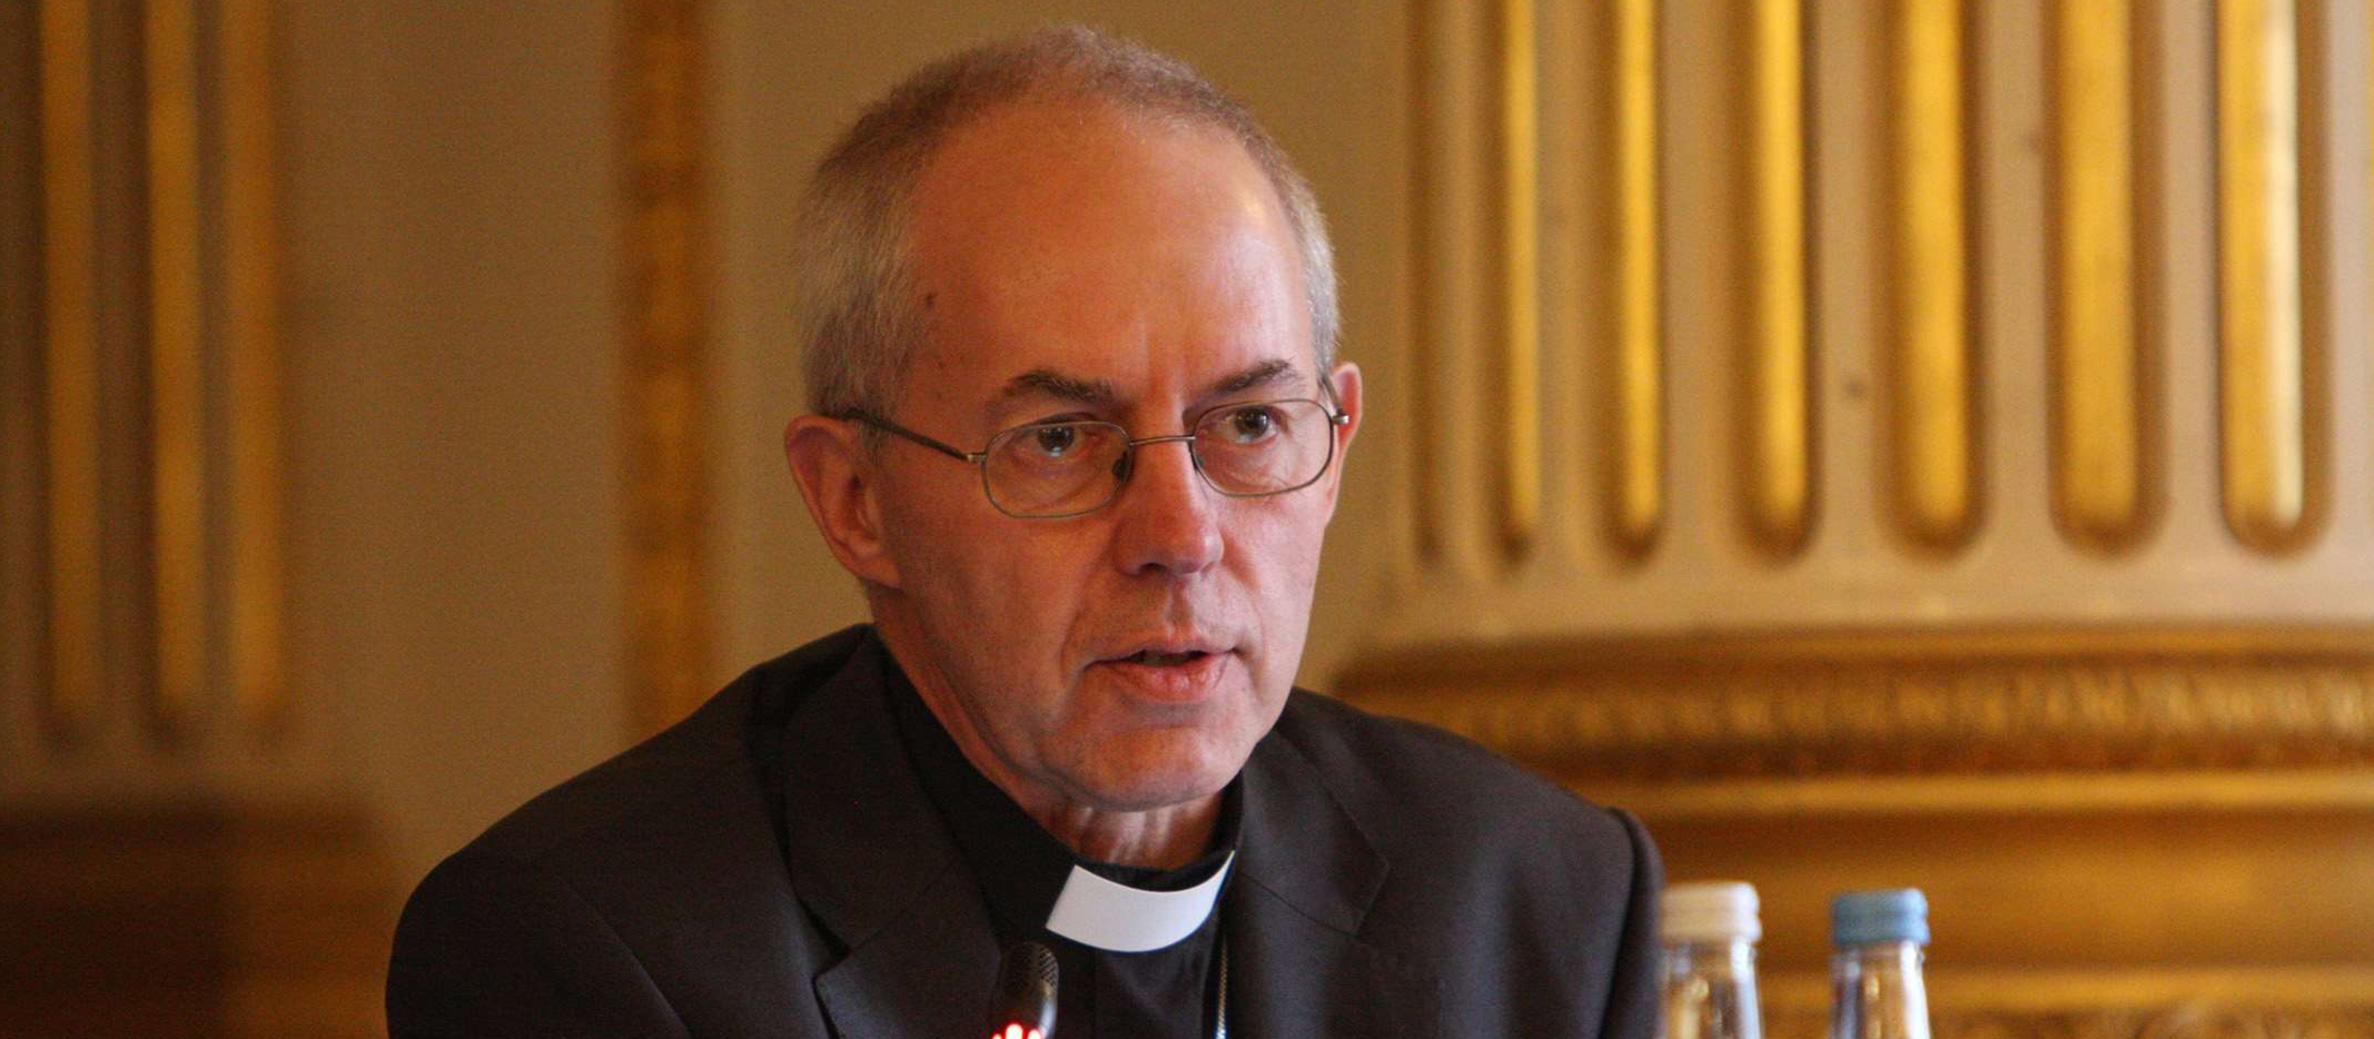 UK: Archbishop of Canterbury calls on Christians to fight ‘horrendous’ violence against Jews